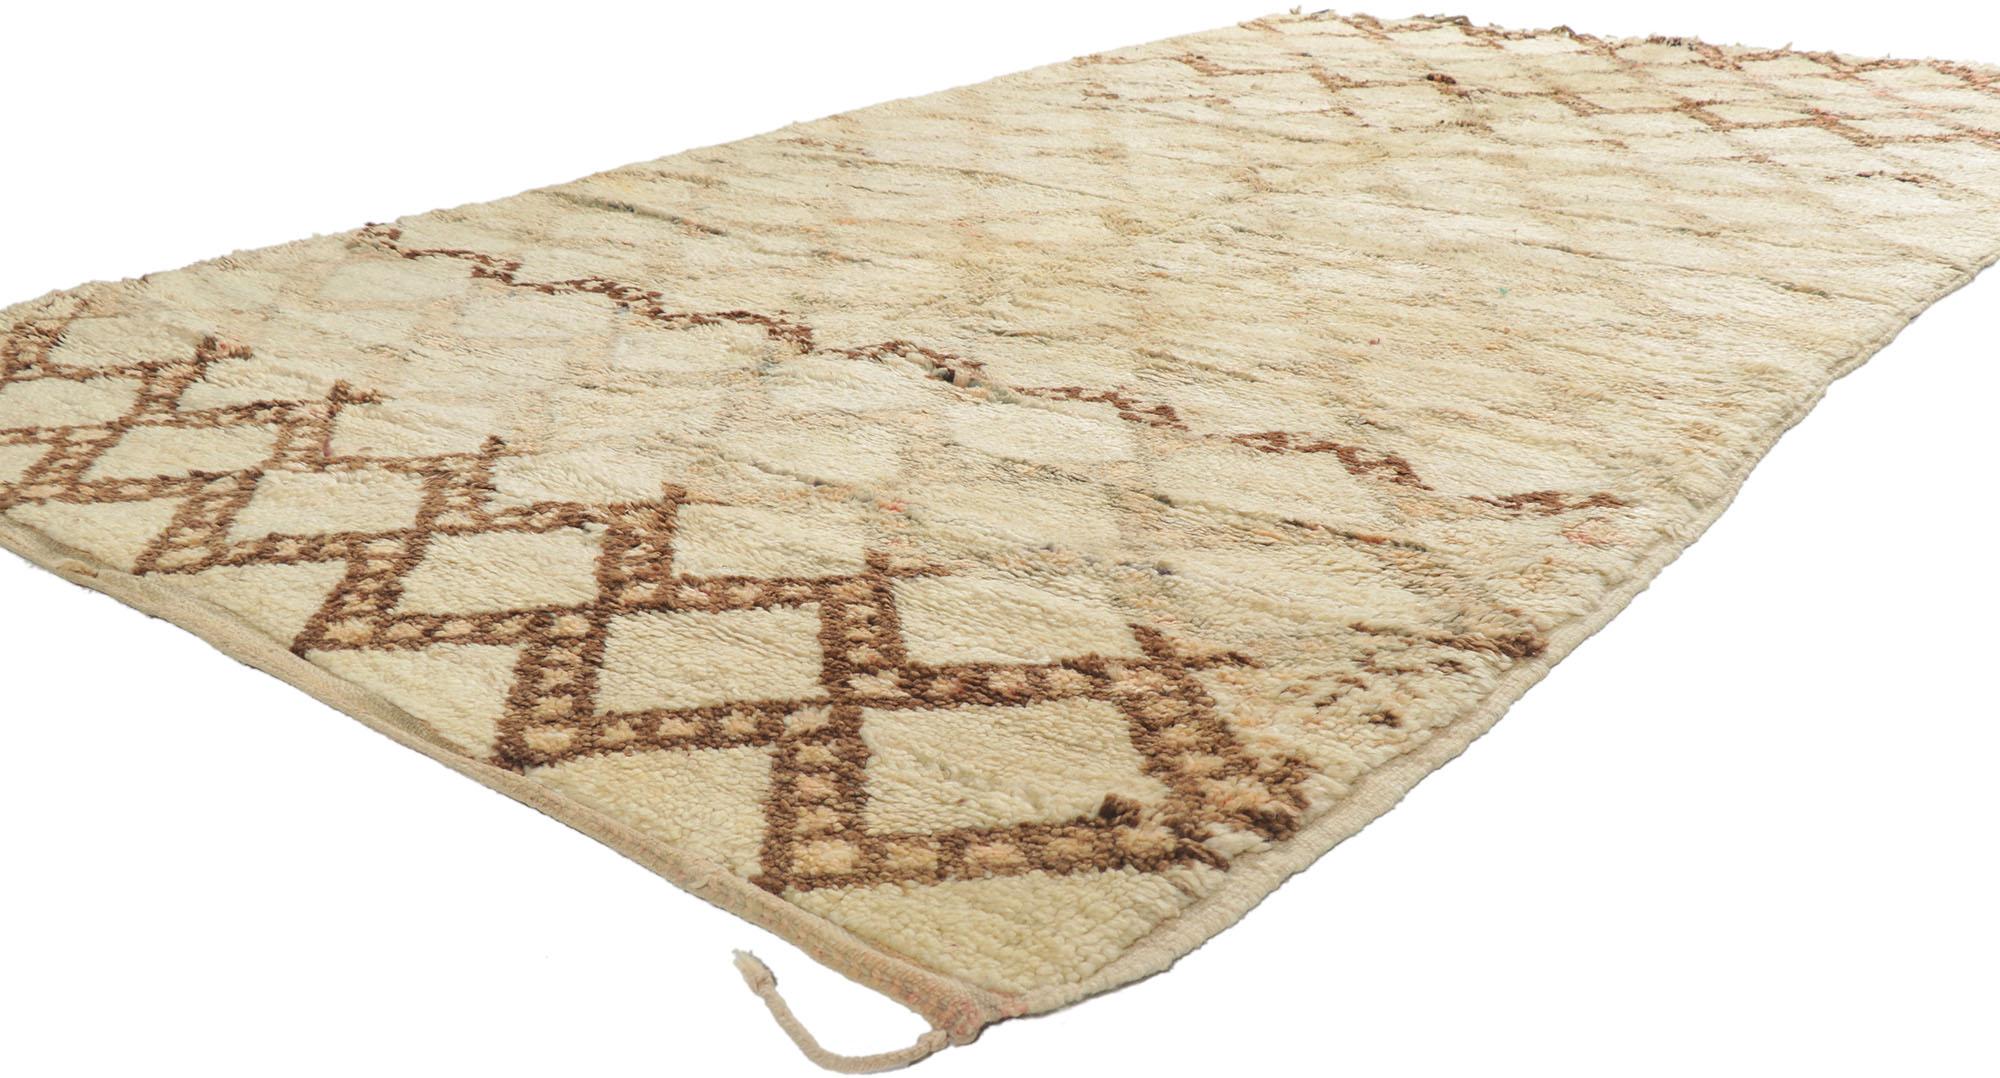 21379 Vintage Moroccan Beni Ourain Rug, 05'07 x 10'02.
Shibui meets Midcentury Modern style in this hand knotted wool vintage Beni Ourain Moroccan rugy. The faded diamond design and soft earthy colors woven into this piece work together creating an